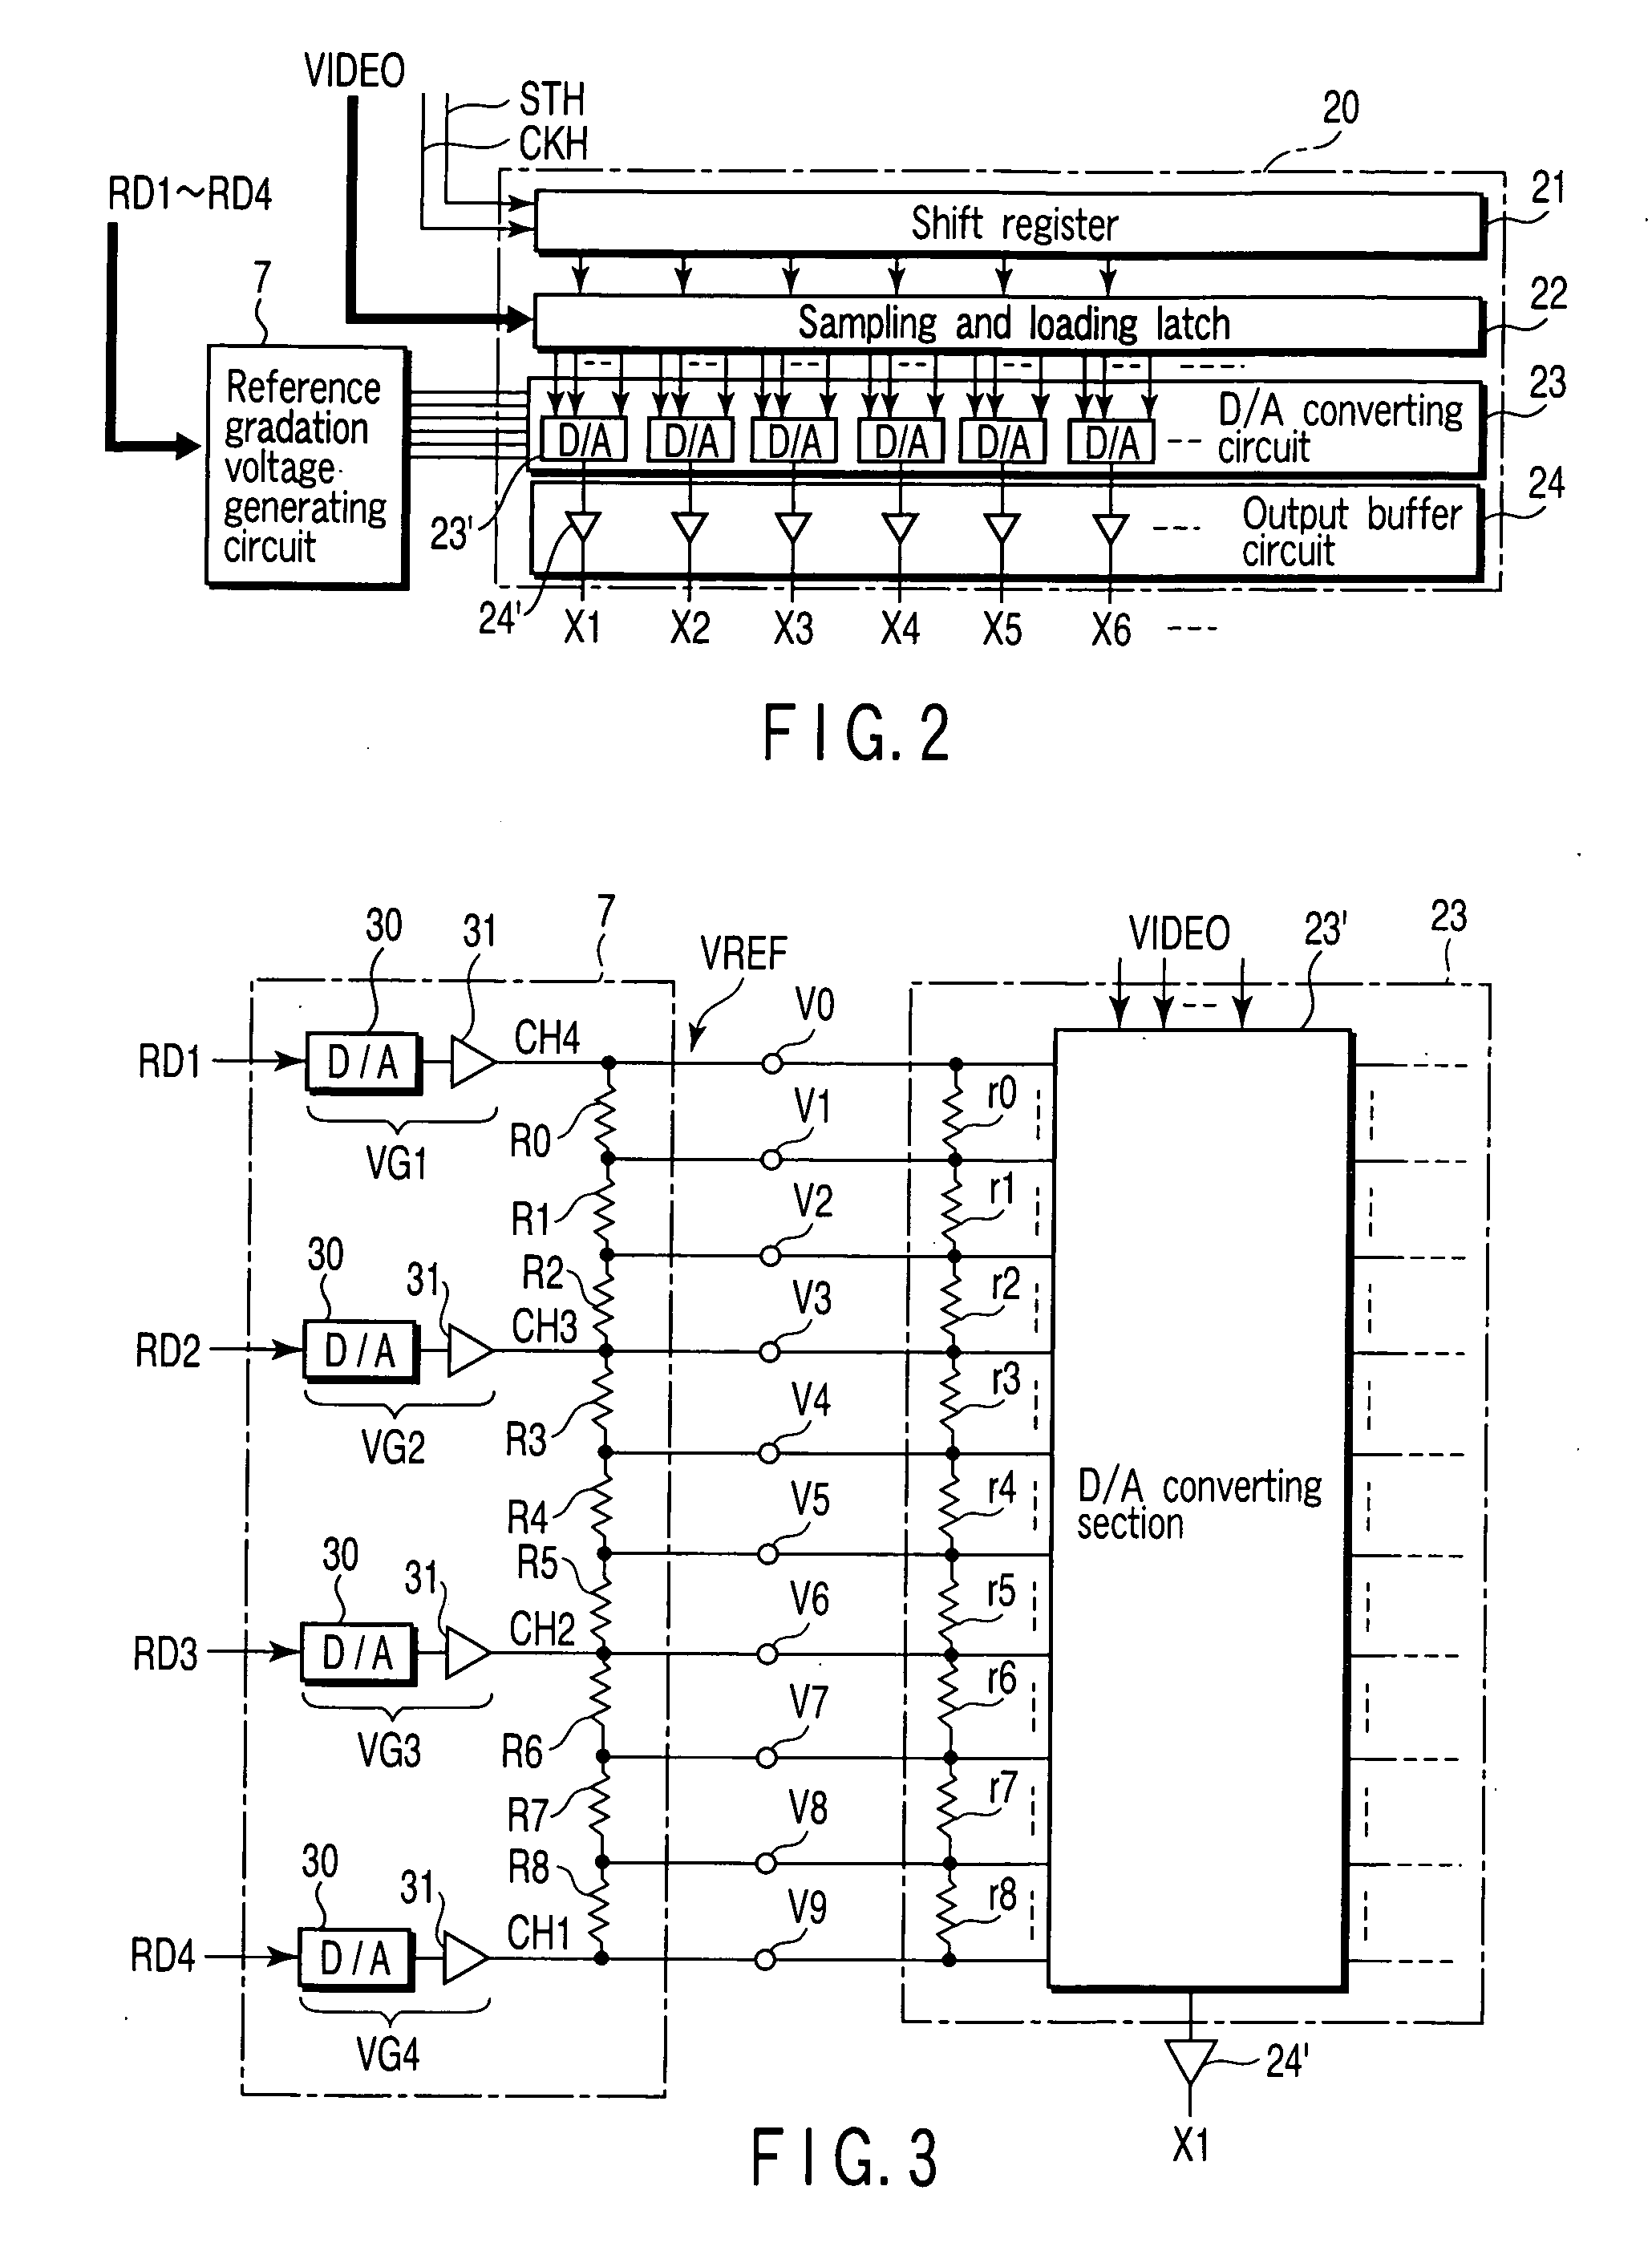 Display signal processing device and display device